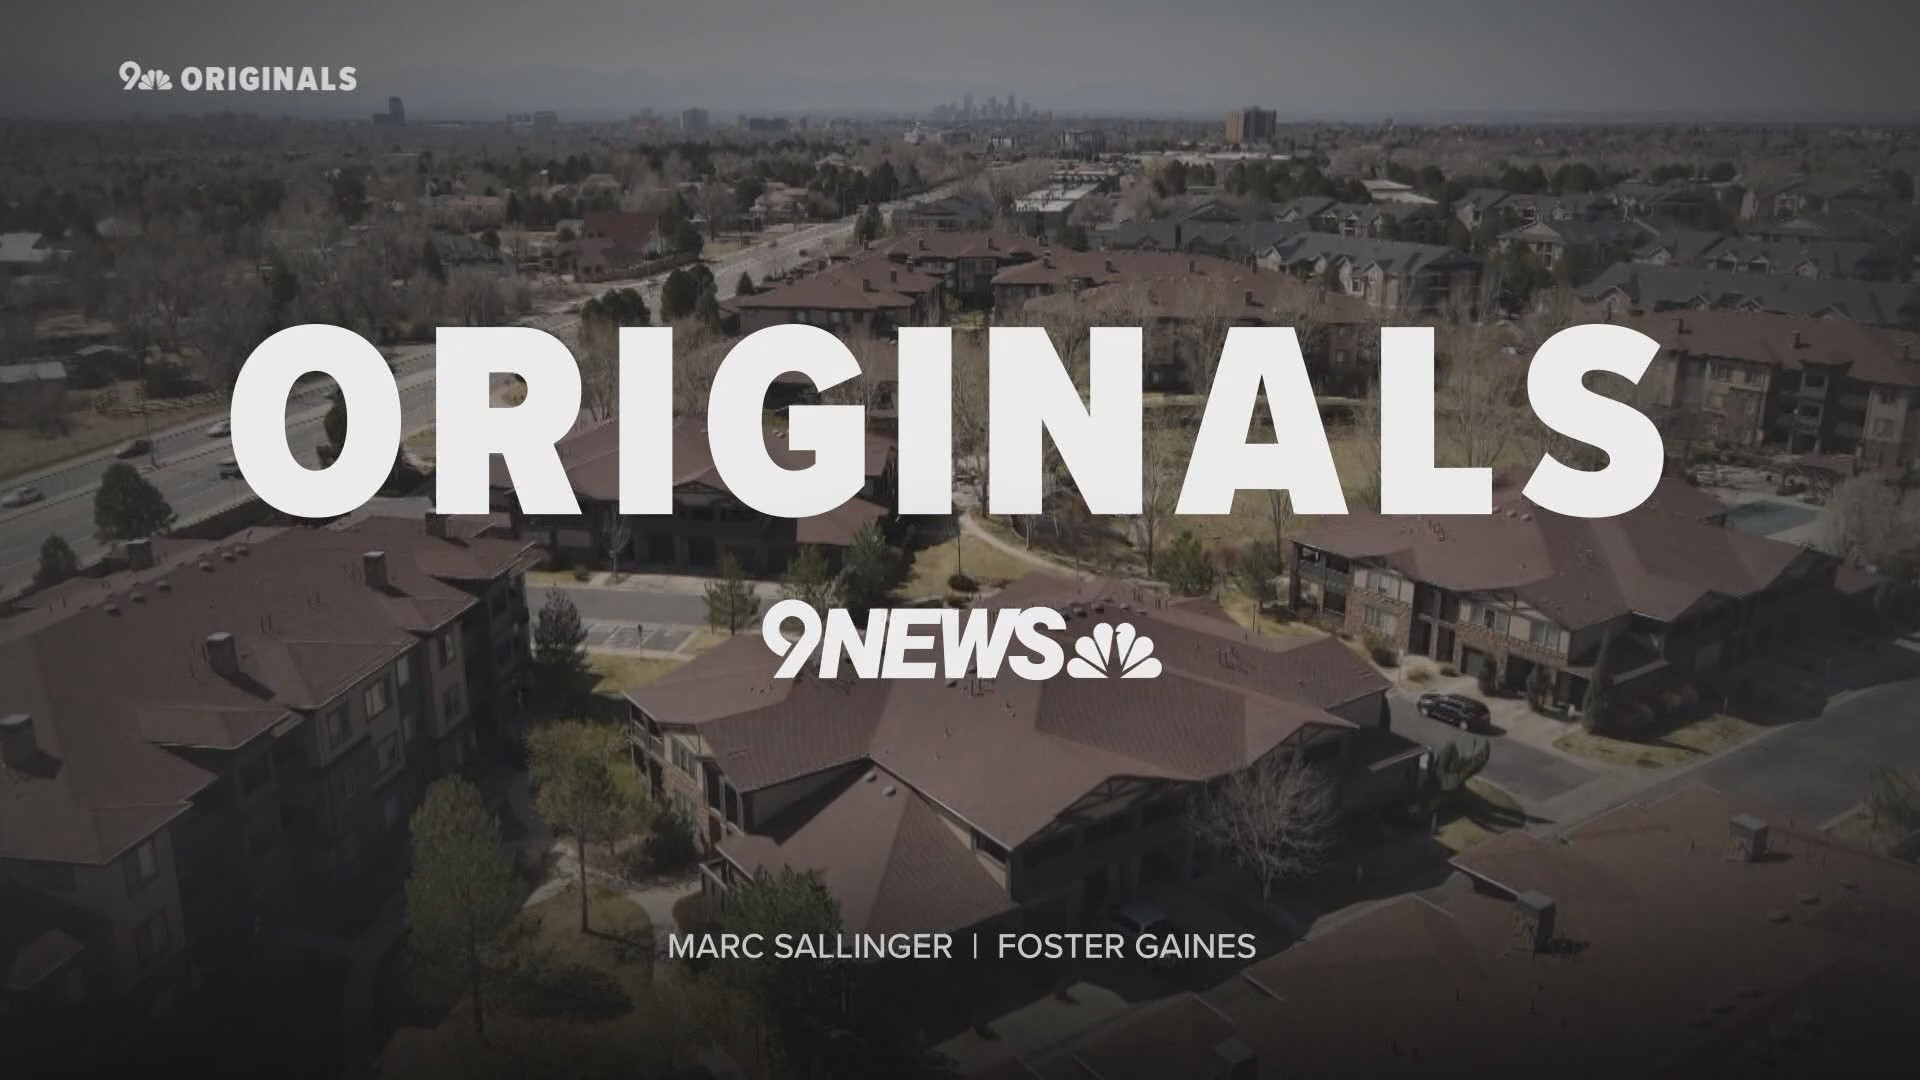 The 9NEWS Originals team is dedicated to telling stories you haven’t heard before in a way you’ve never seen.